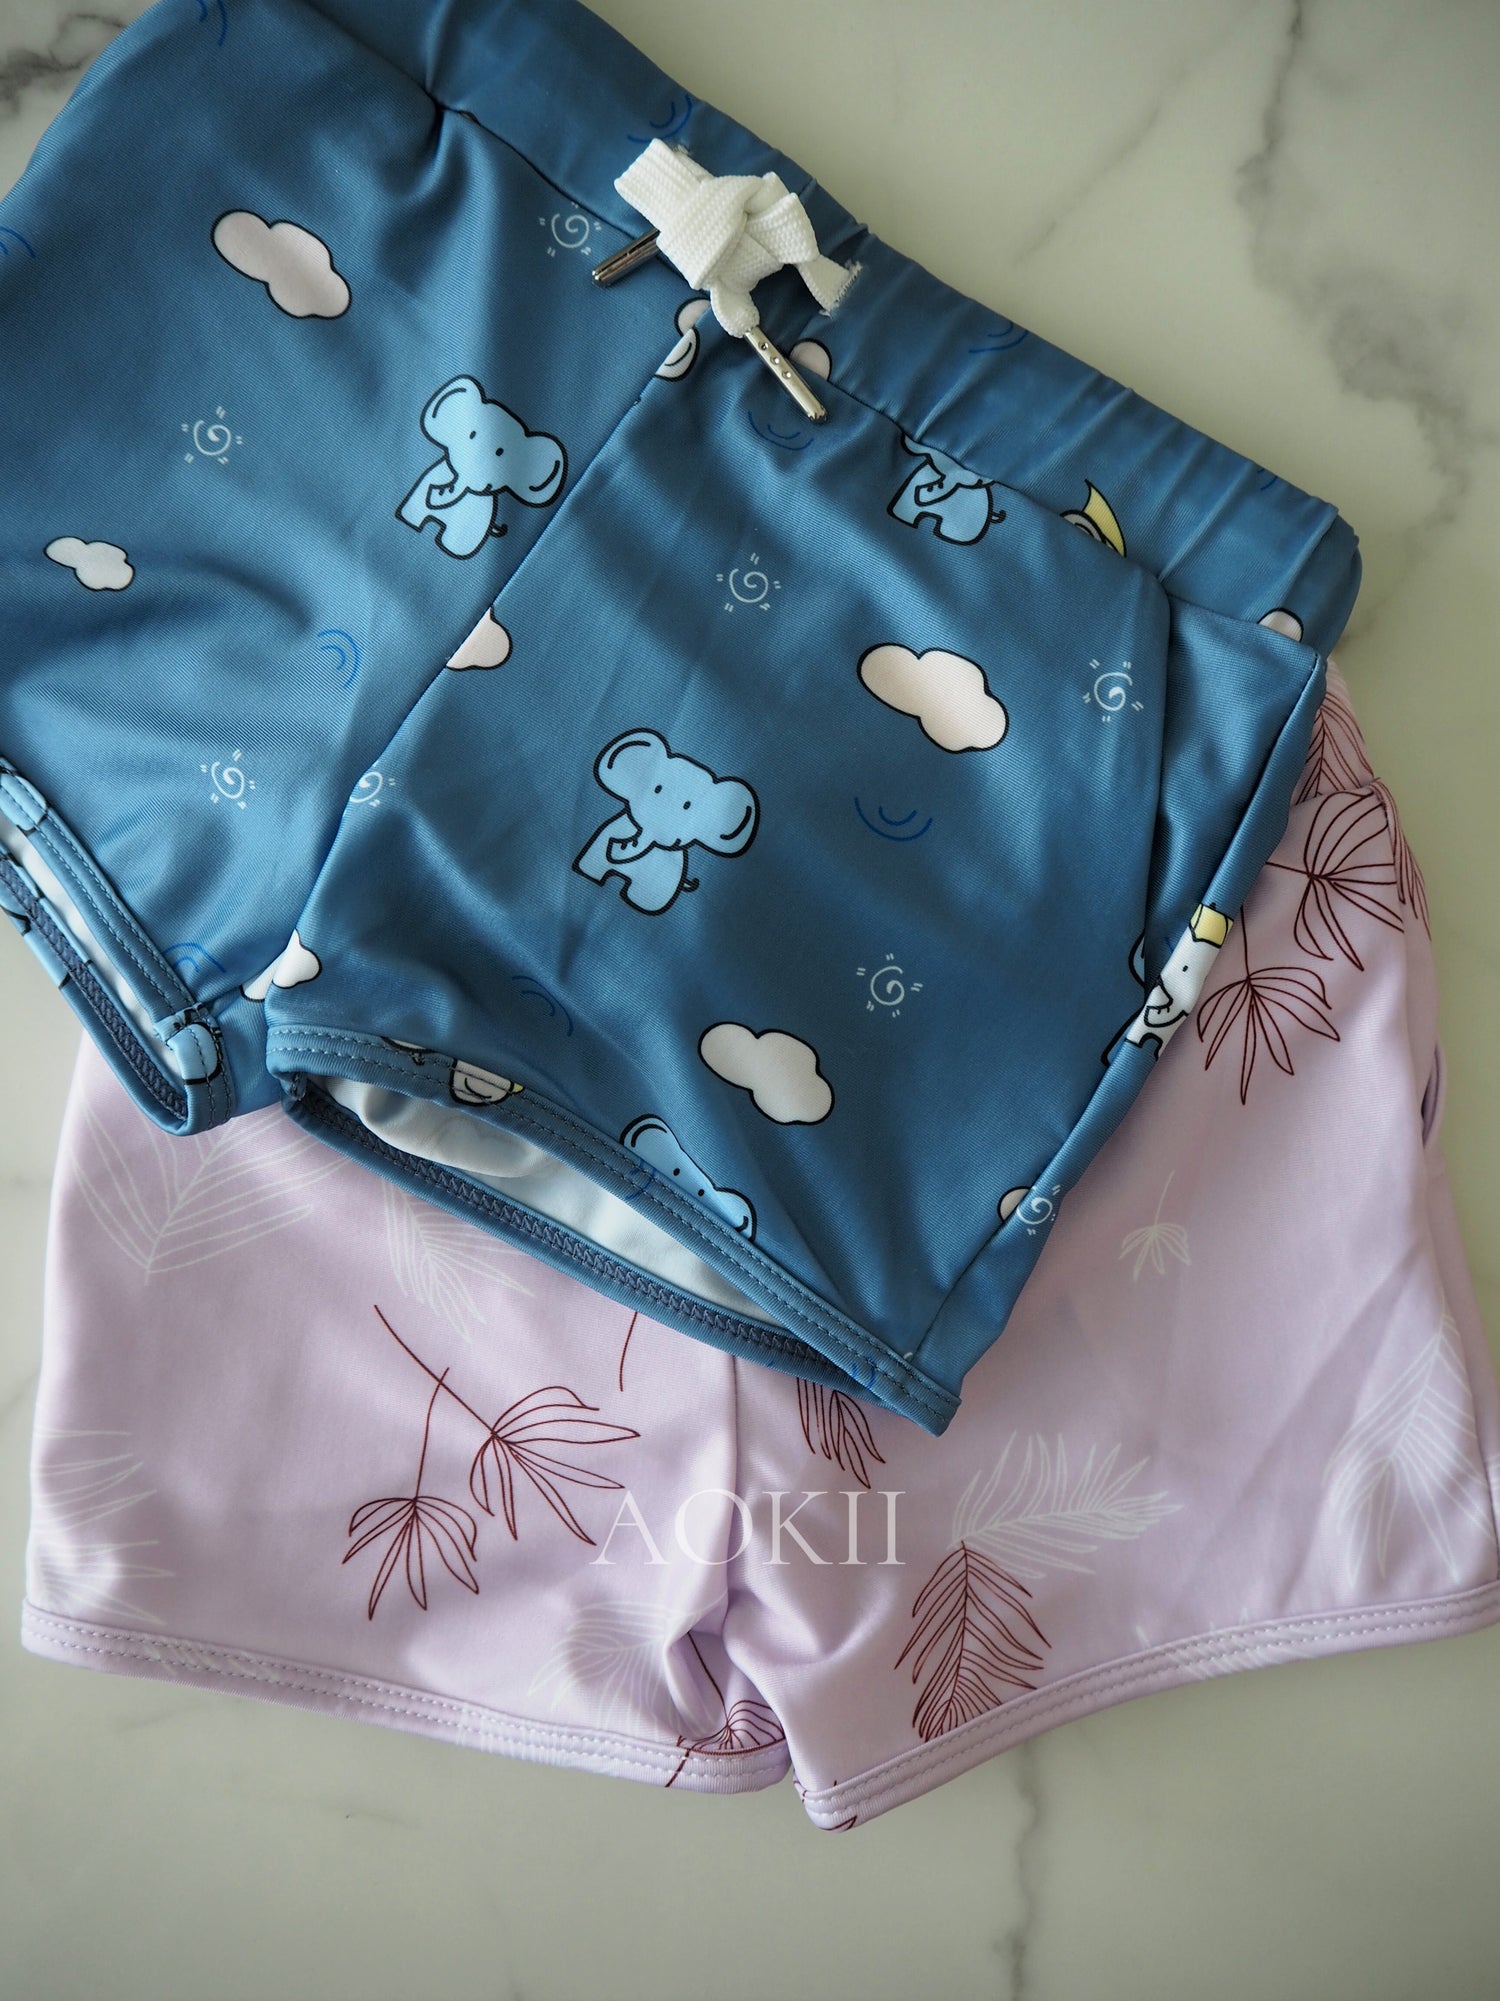 Eco-friendly sustainable swimwear series for babies and children